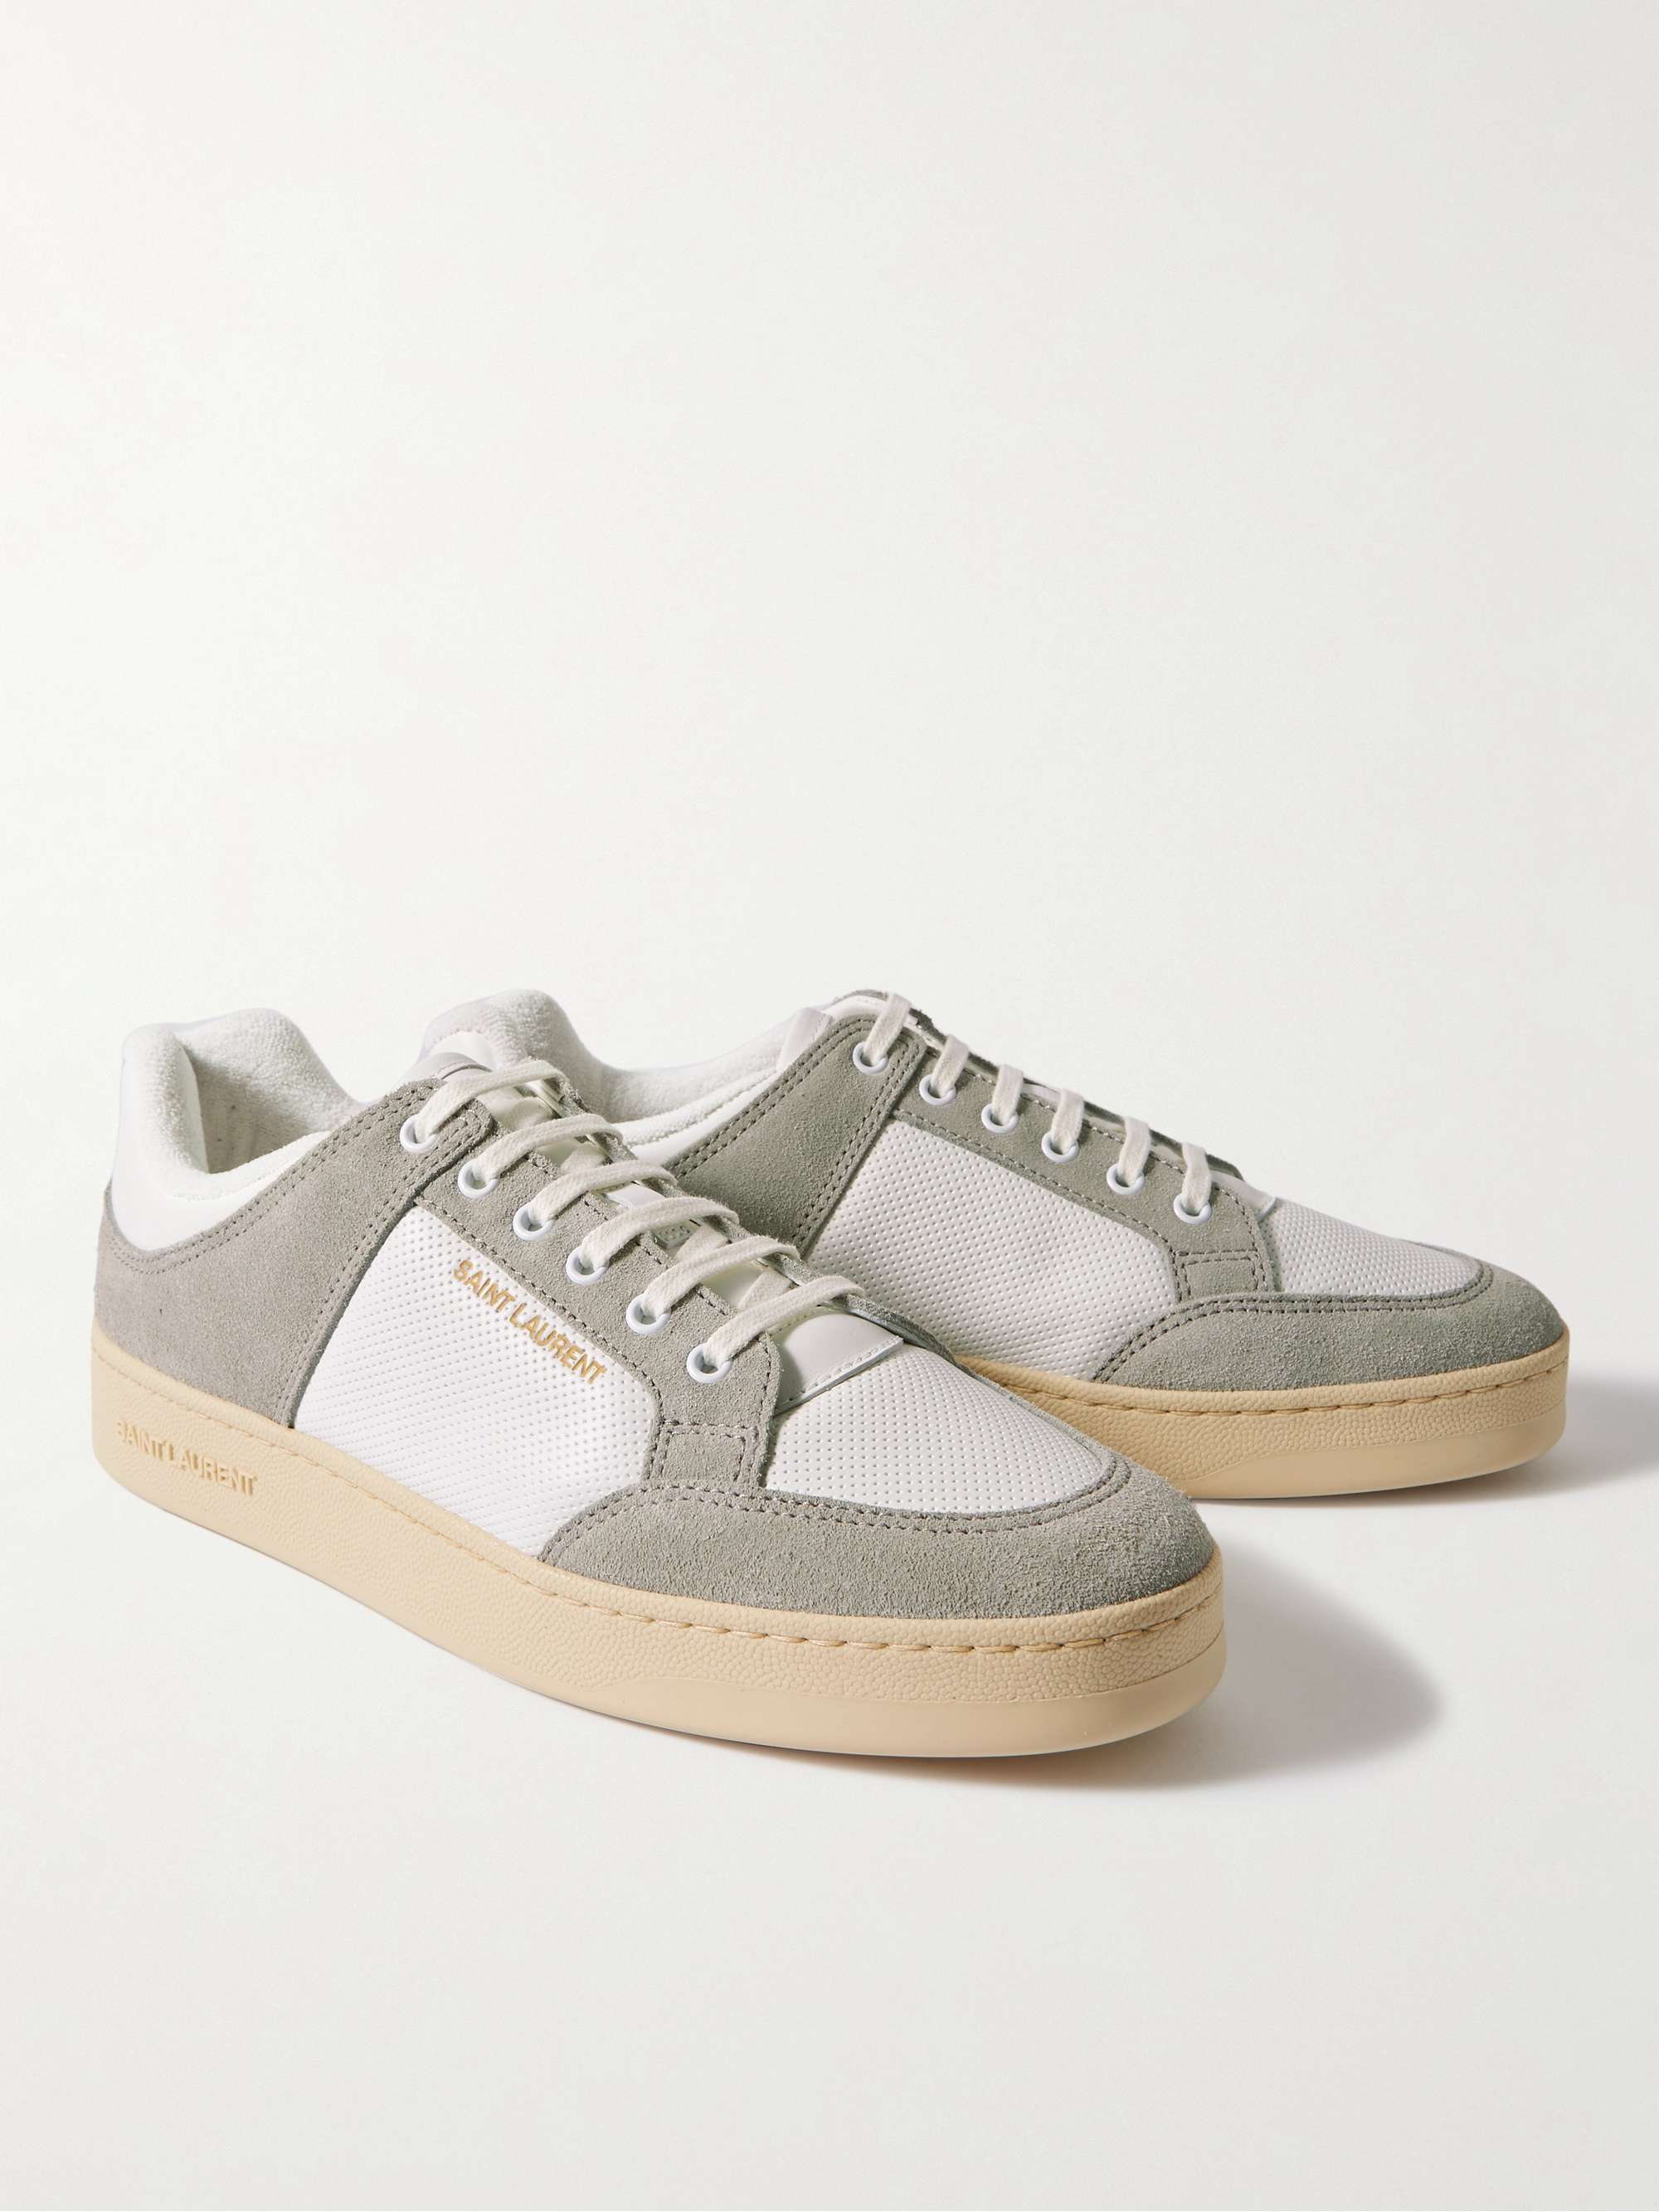 SAINT LAURENT SL/61 Perforated Leather and Suede Sneakers for Men | MR ...